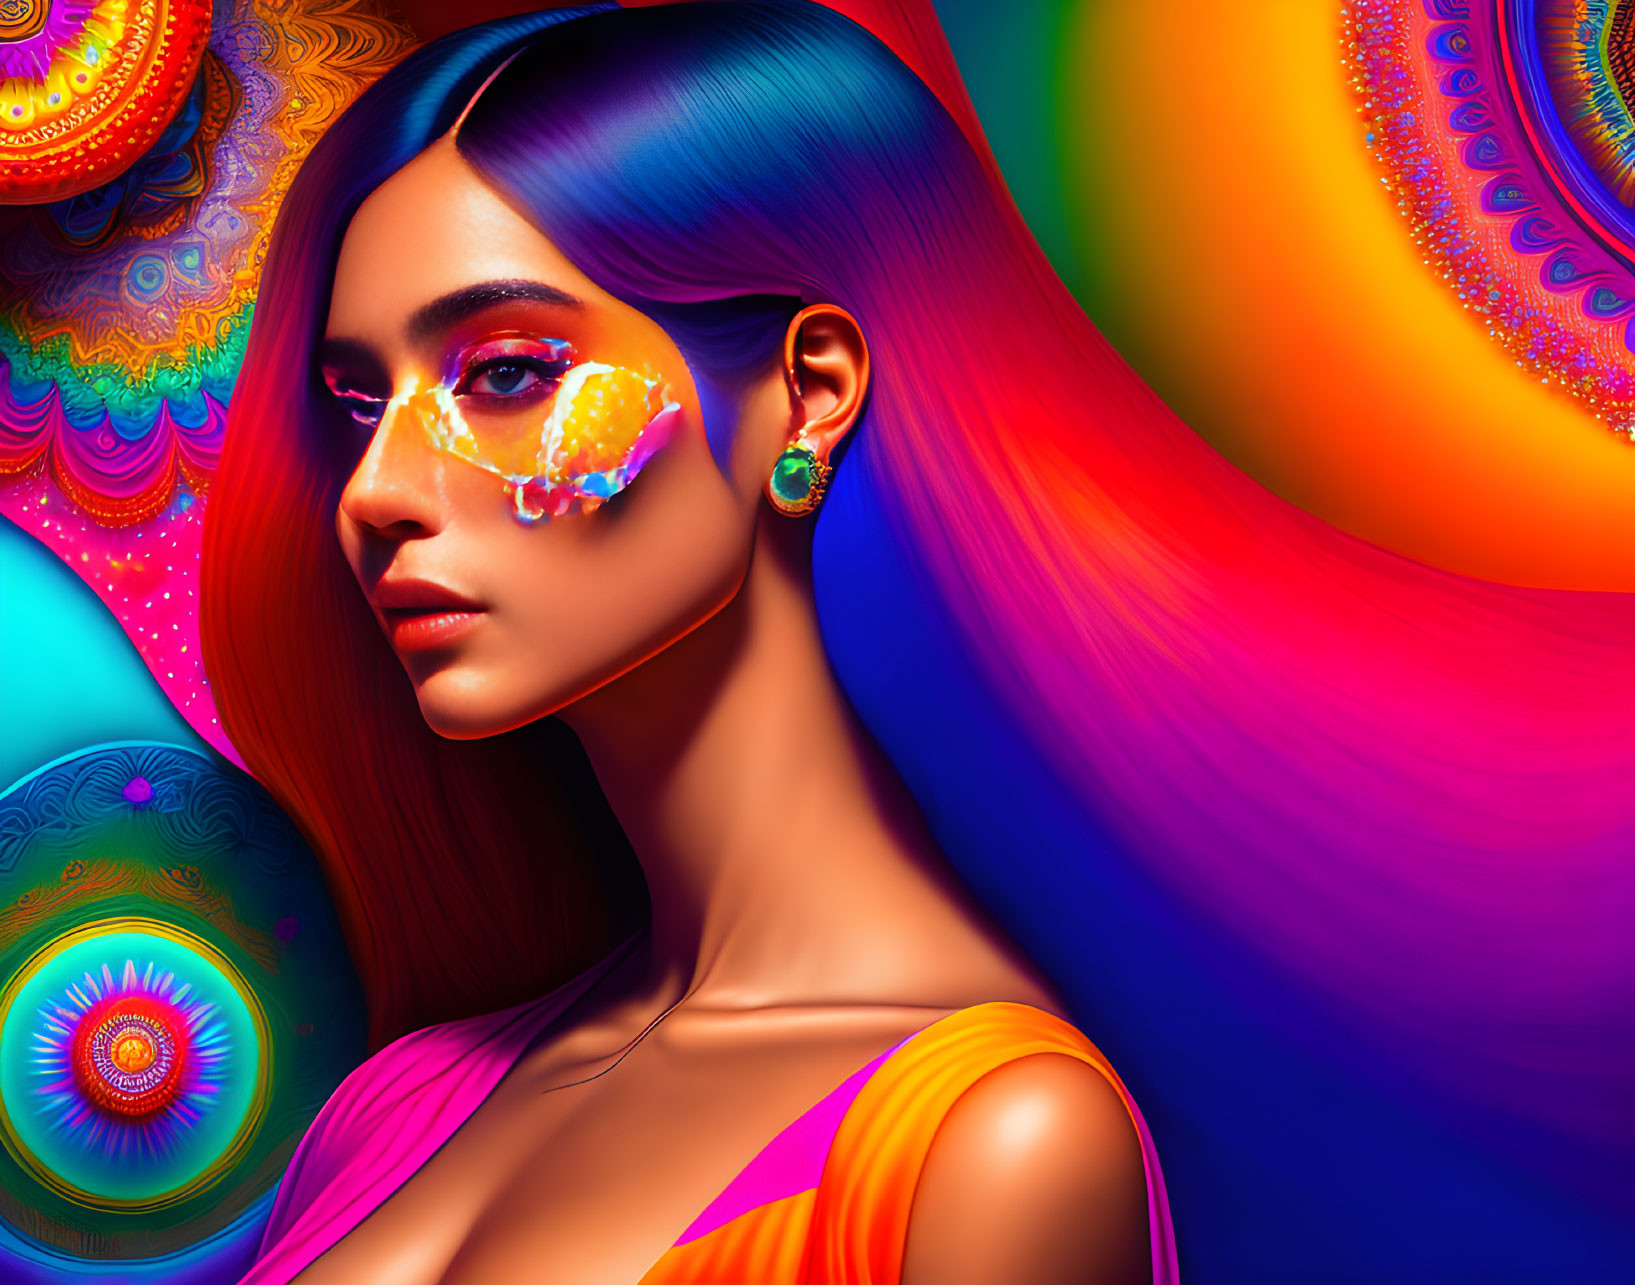 Colorful digital artwork featuring woman with multicolored hair and face paint